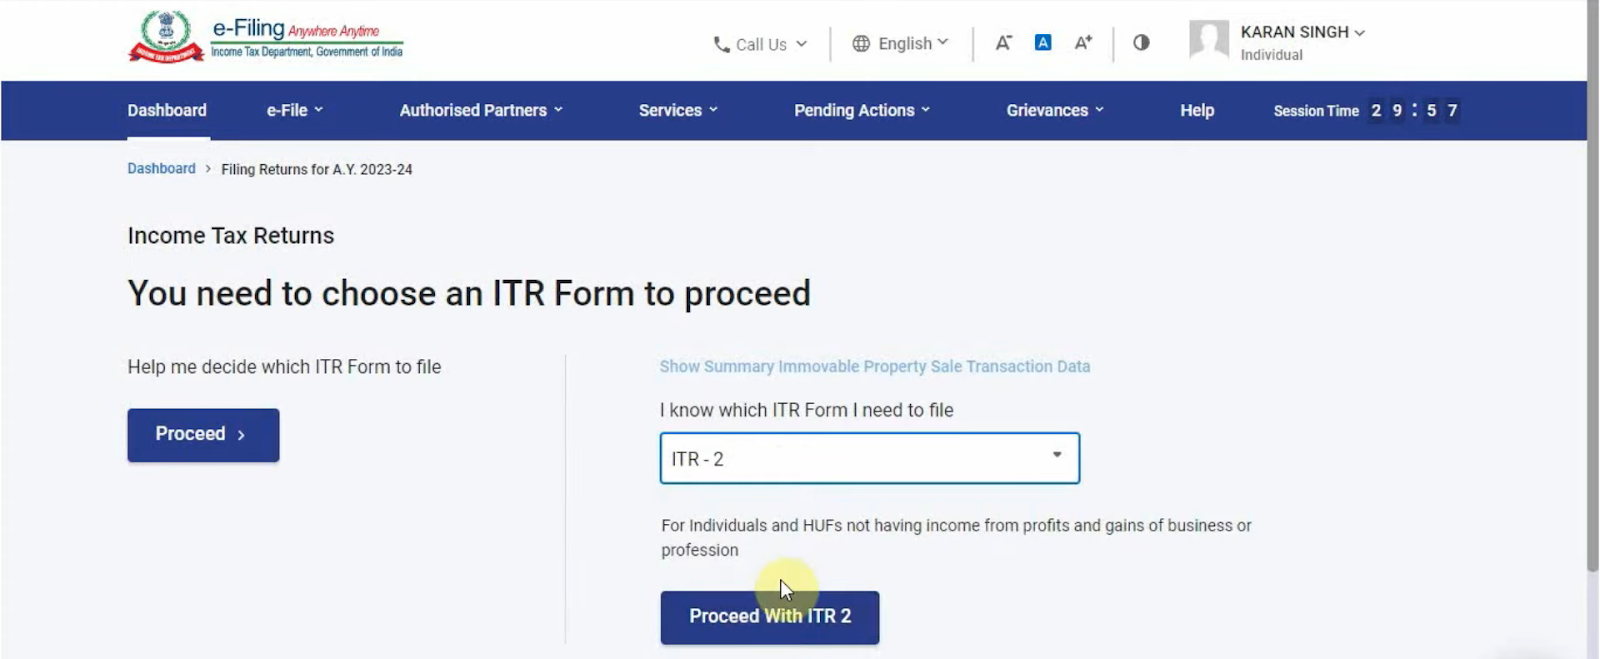 Now you will need to choose the relevant ITR form. Here you need to select ITR 2 and click on Proceed.